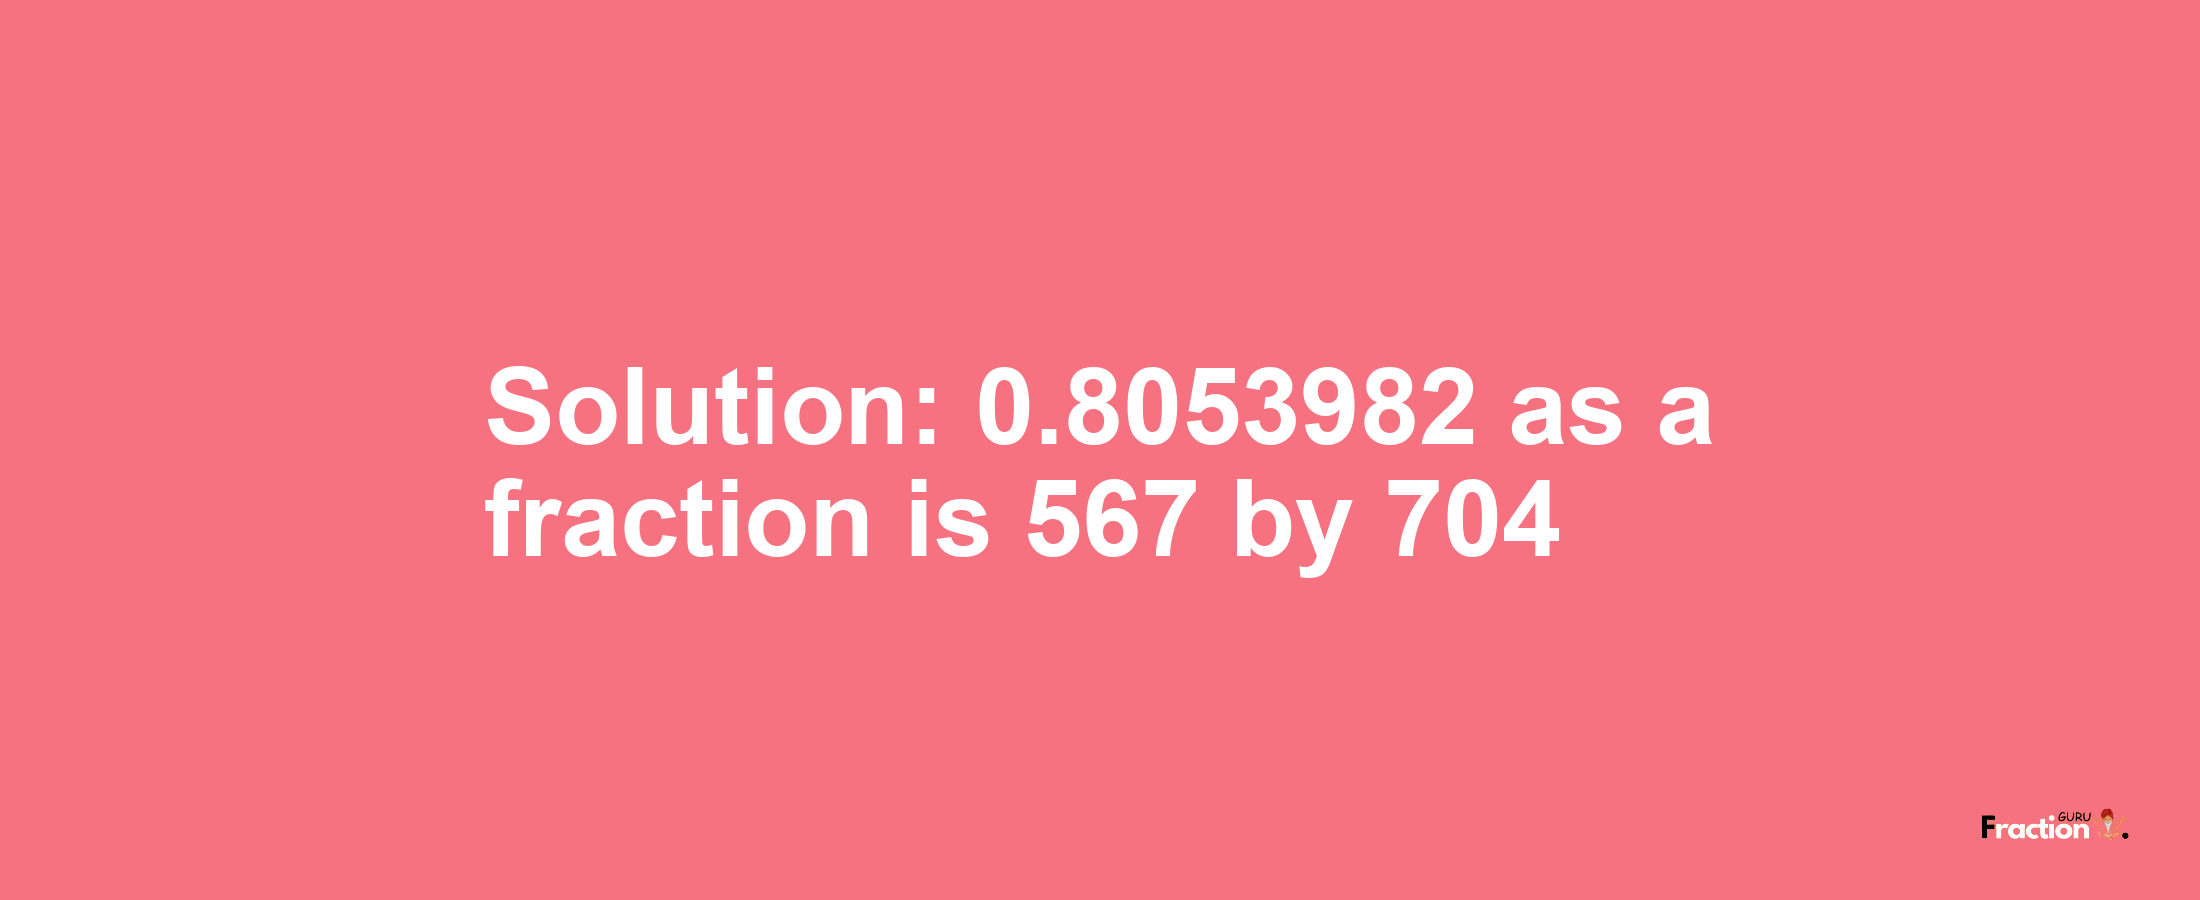 Solution:0.8053982 as a fraction is 567/704